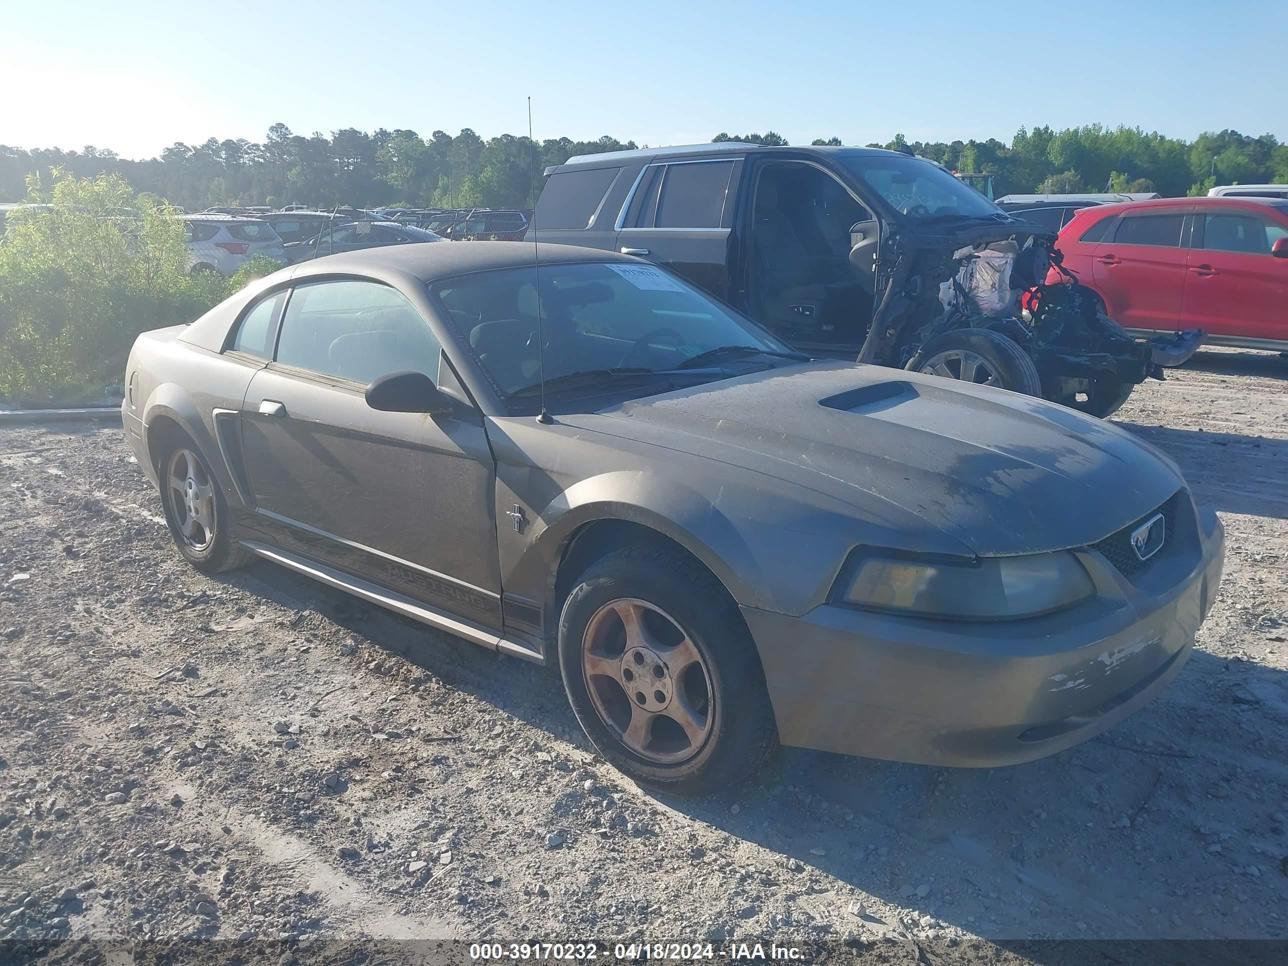 VIN: 1FAFP40422F154215 - ford mustang